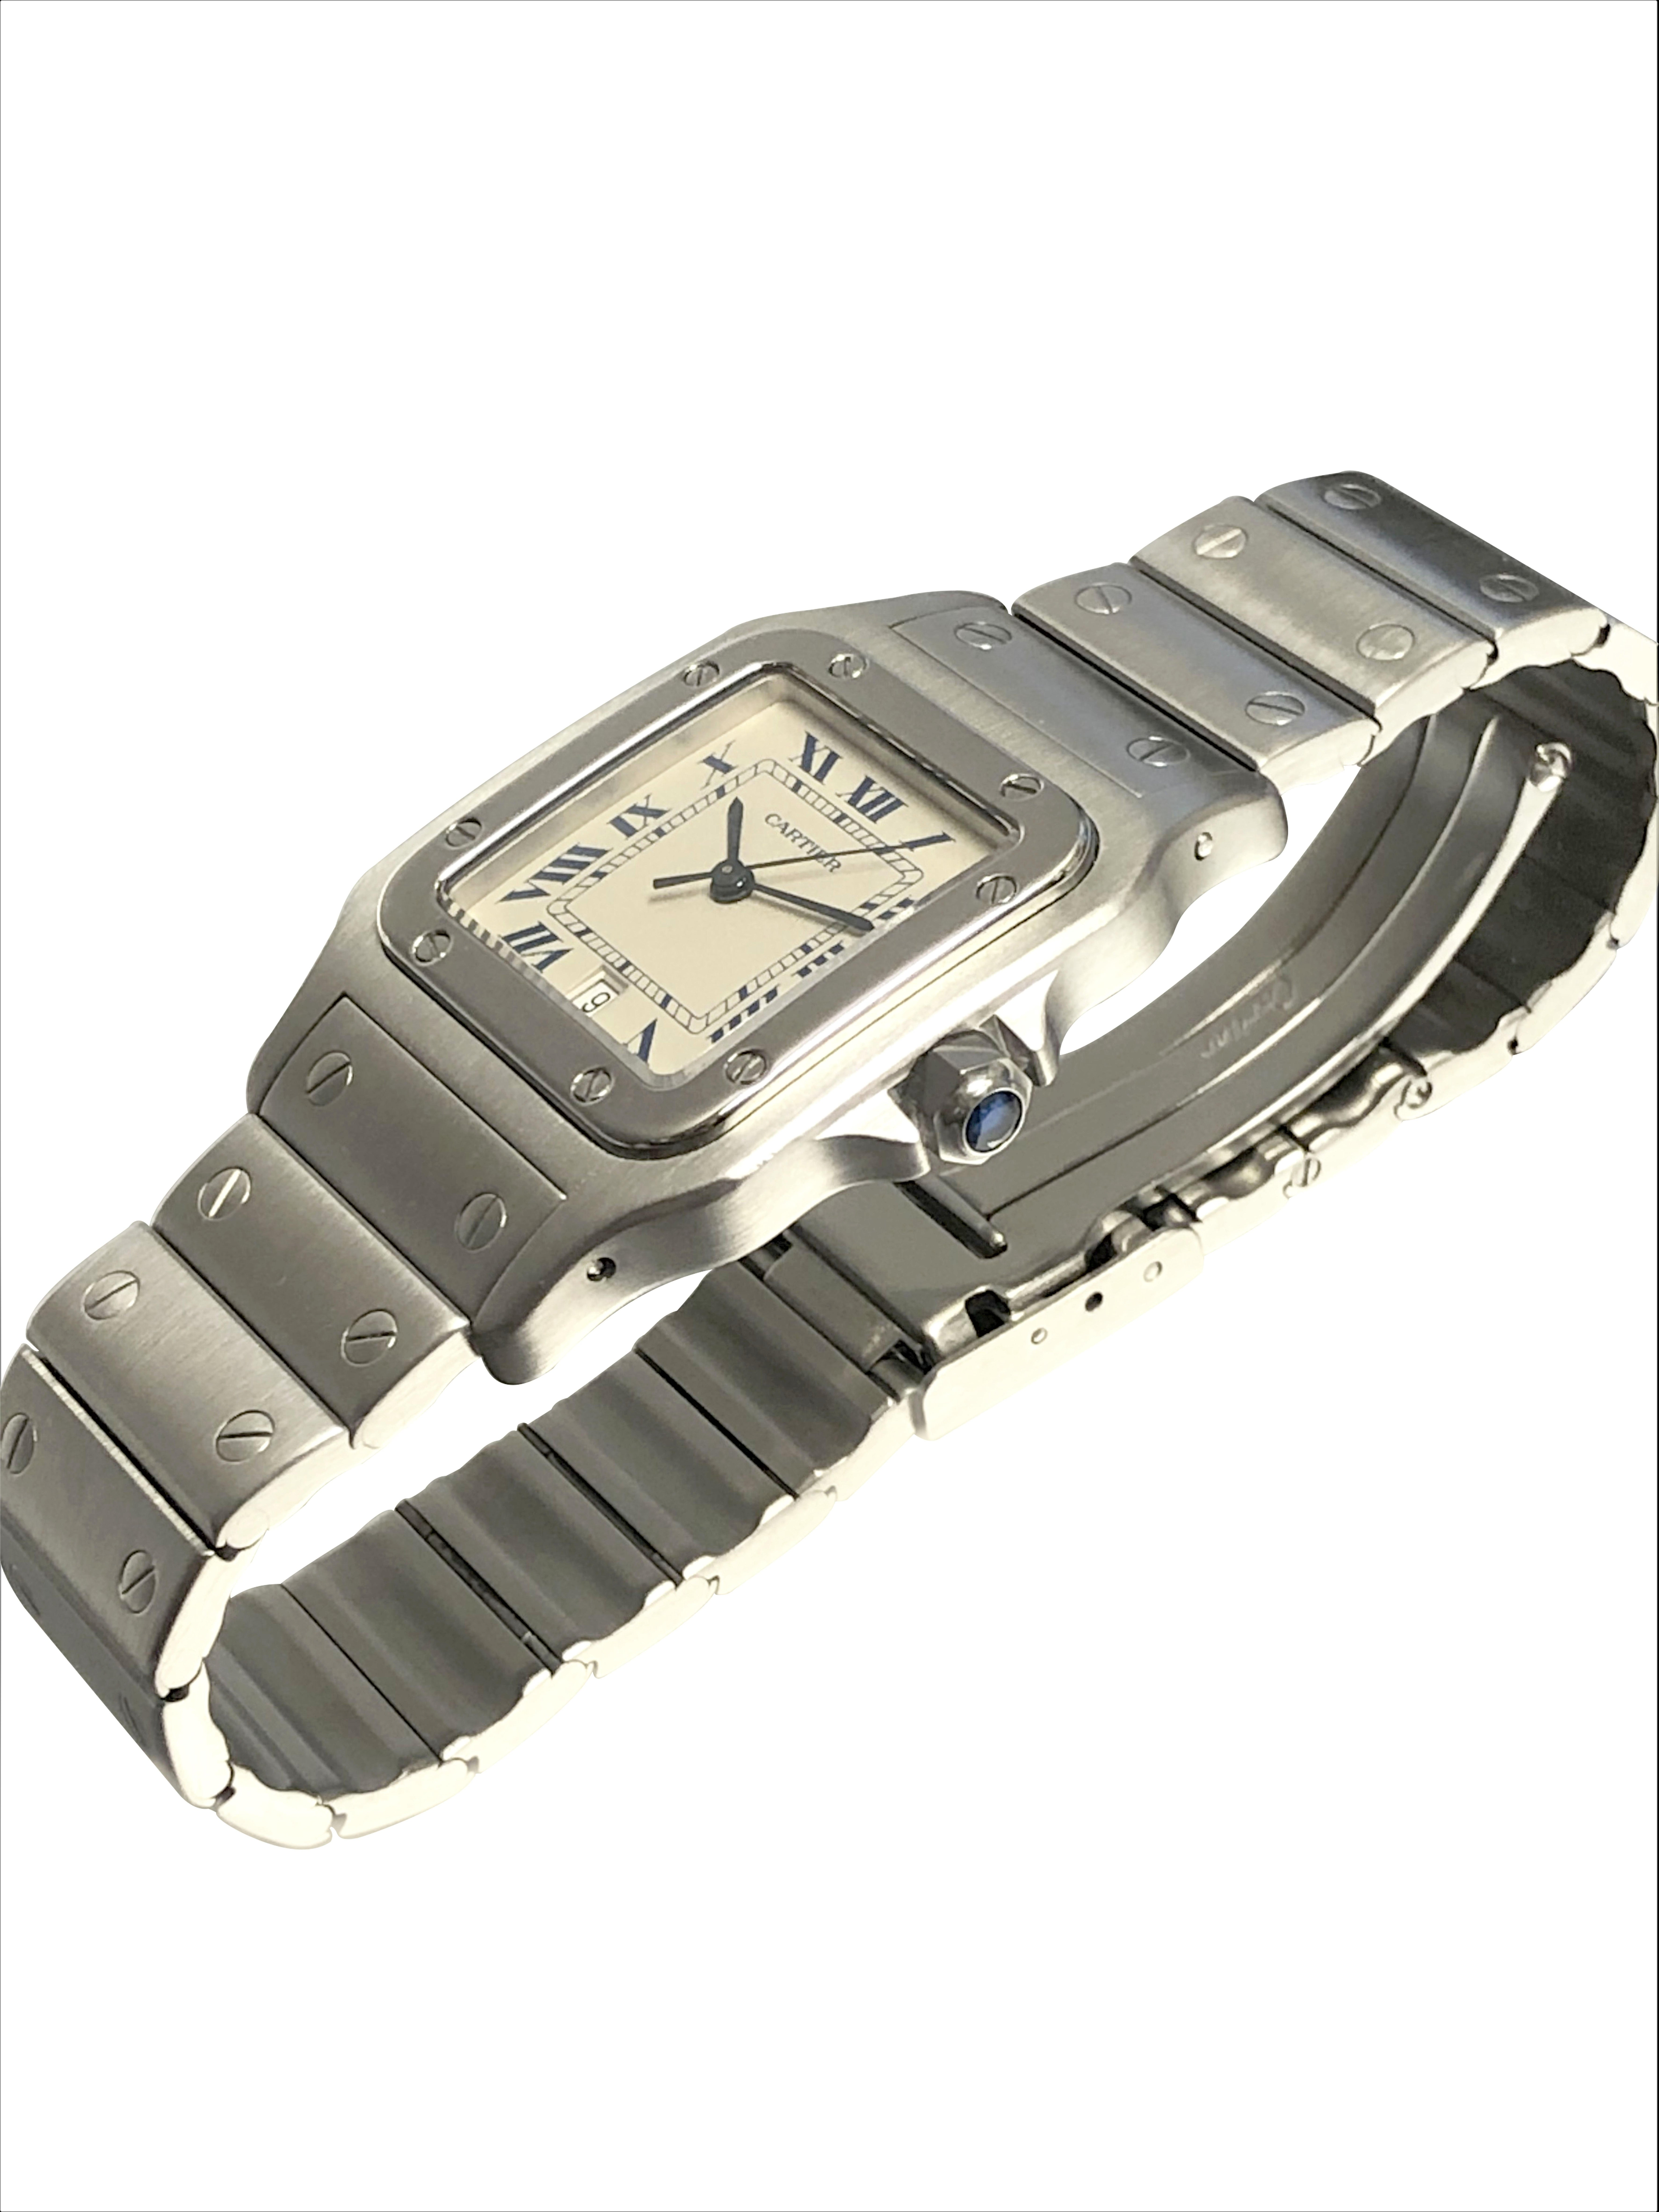 Circa 2010 Cartier Santos Galbee, 40 X 29 M.M.  Stainless Steel 3 Piece Water resistant case. Quartz Movement, White Dial, Blue Roman Numerals, sweep seconds hand and a Calendar window at the 6 Position. 3/4 inch wide Stainless Steel Bracelet with